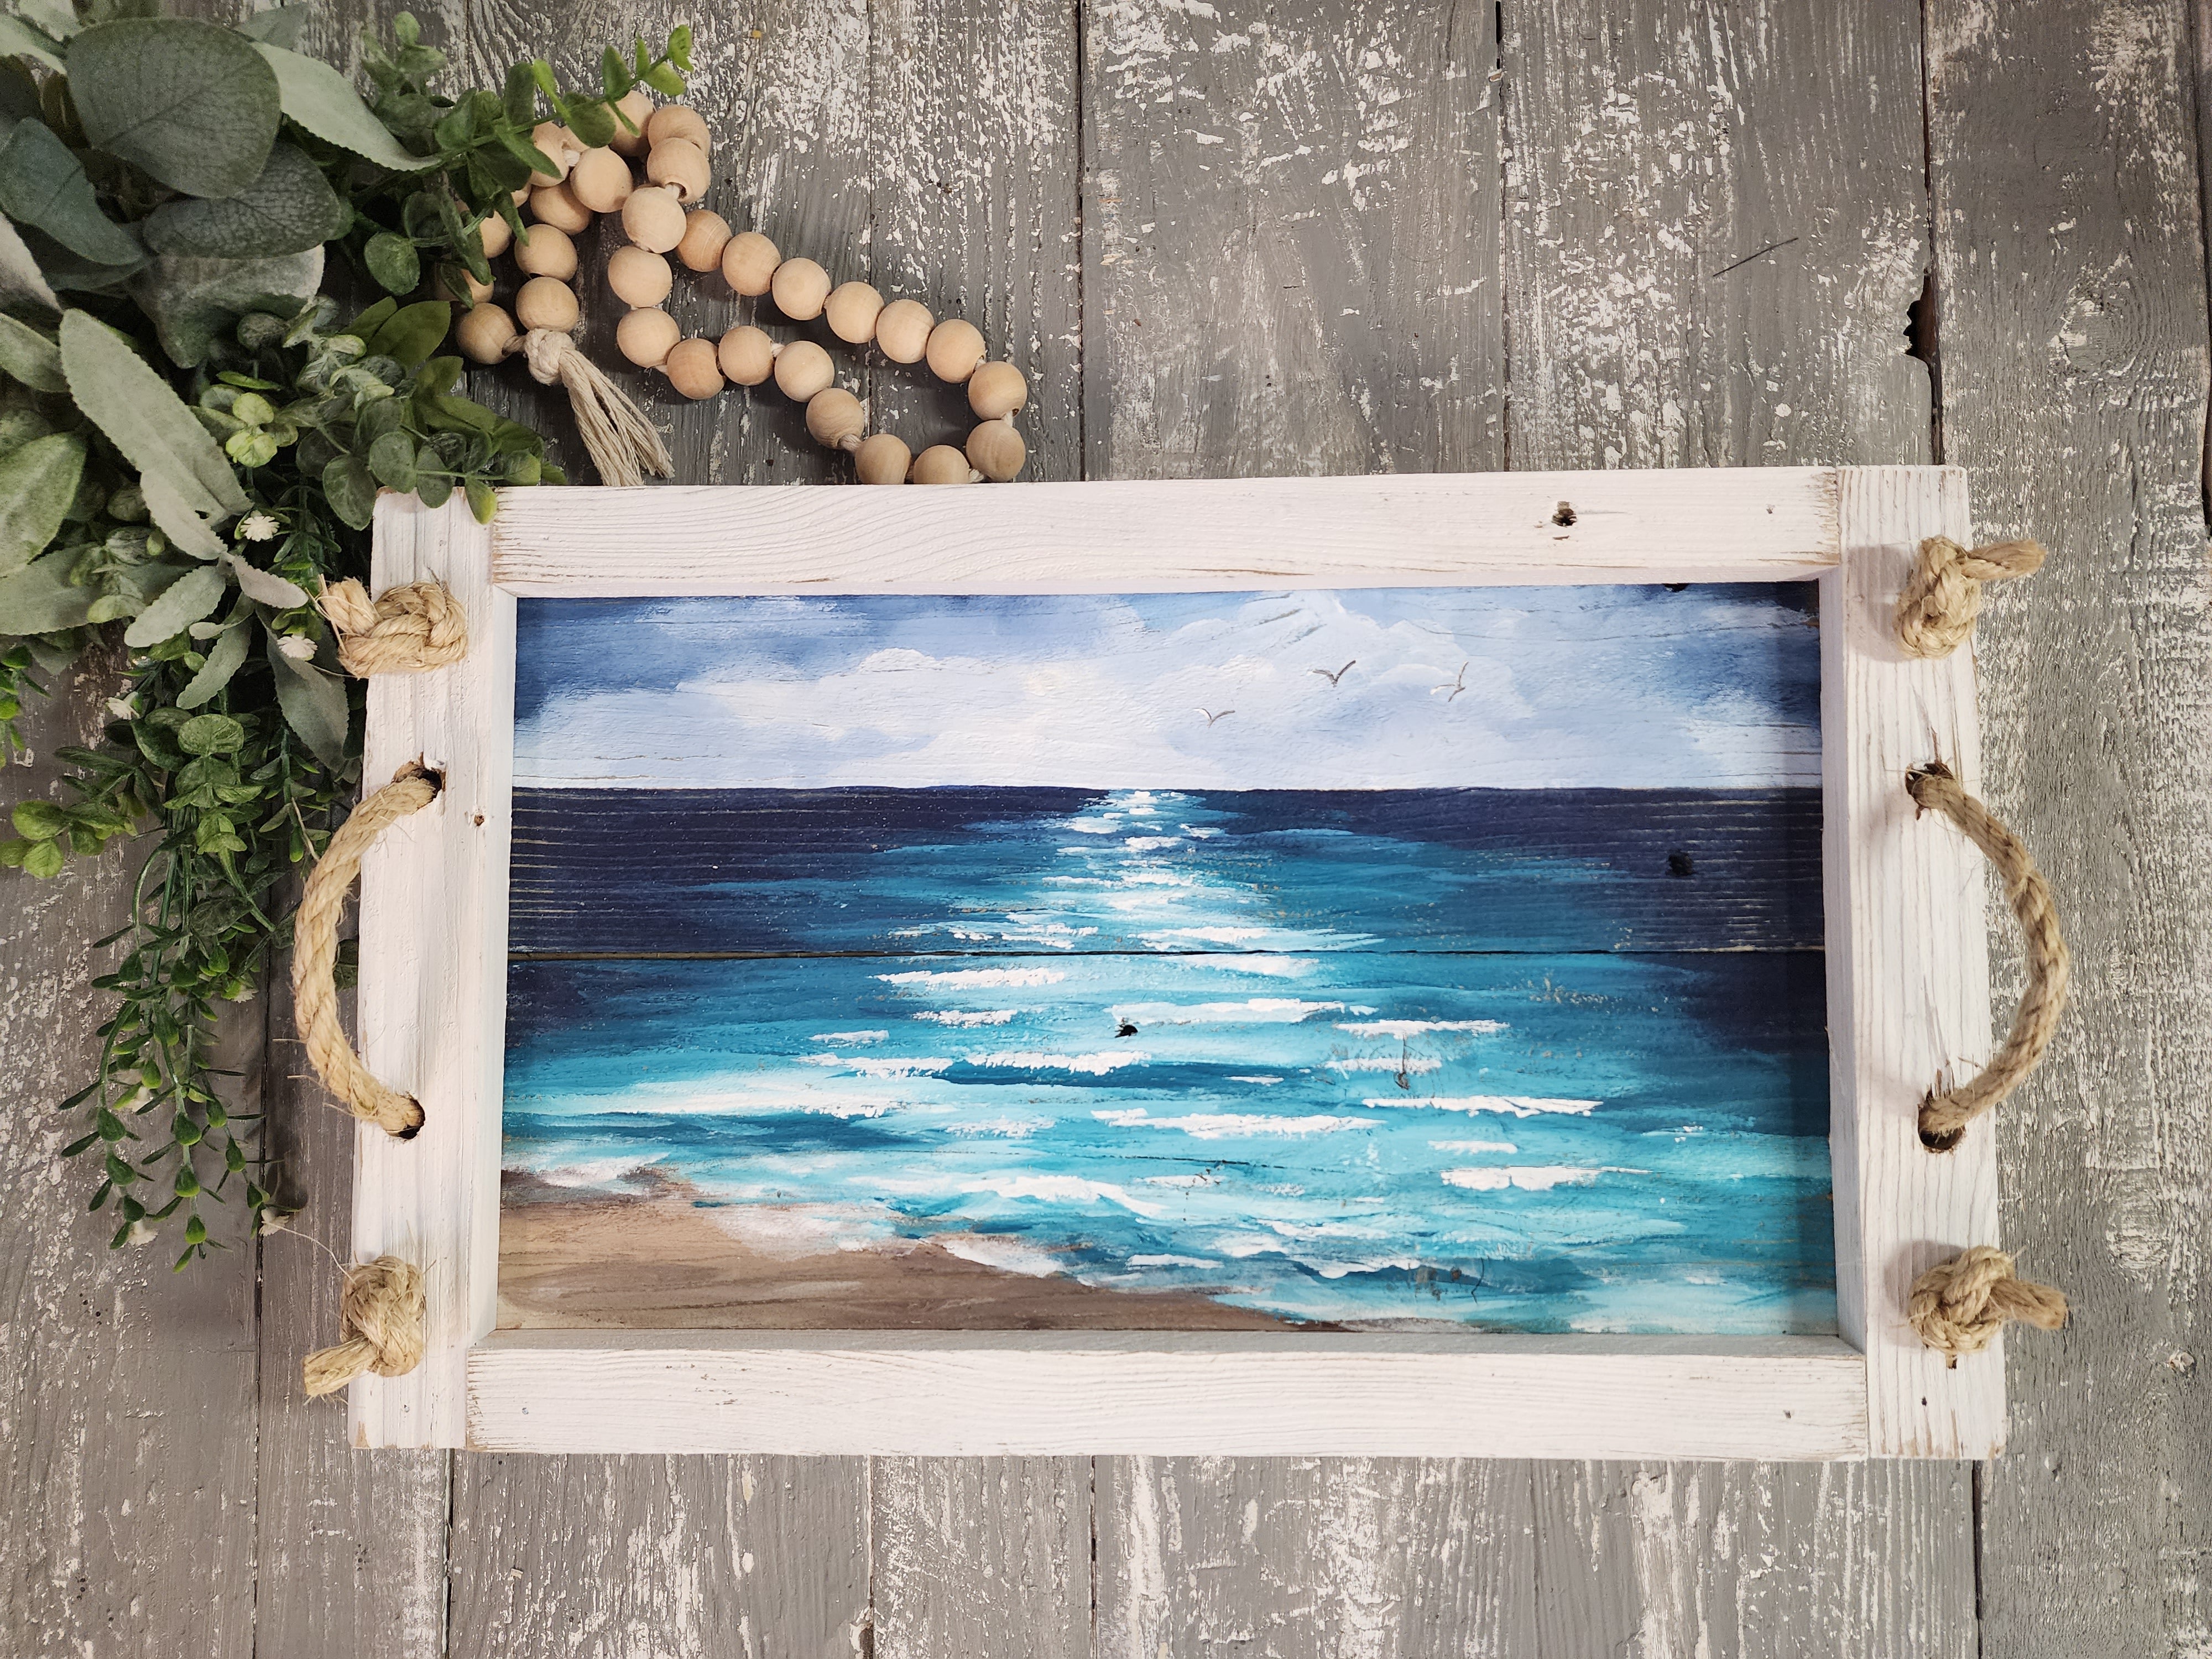 Beach & Coastal Theme White Reclaimed Wood Picture Frames for